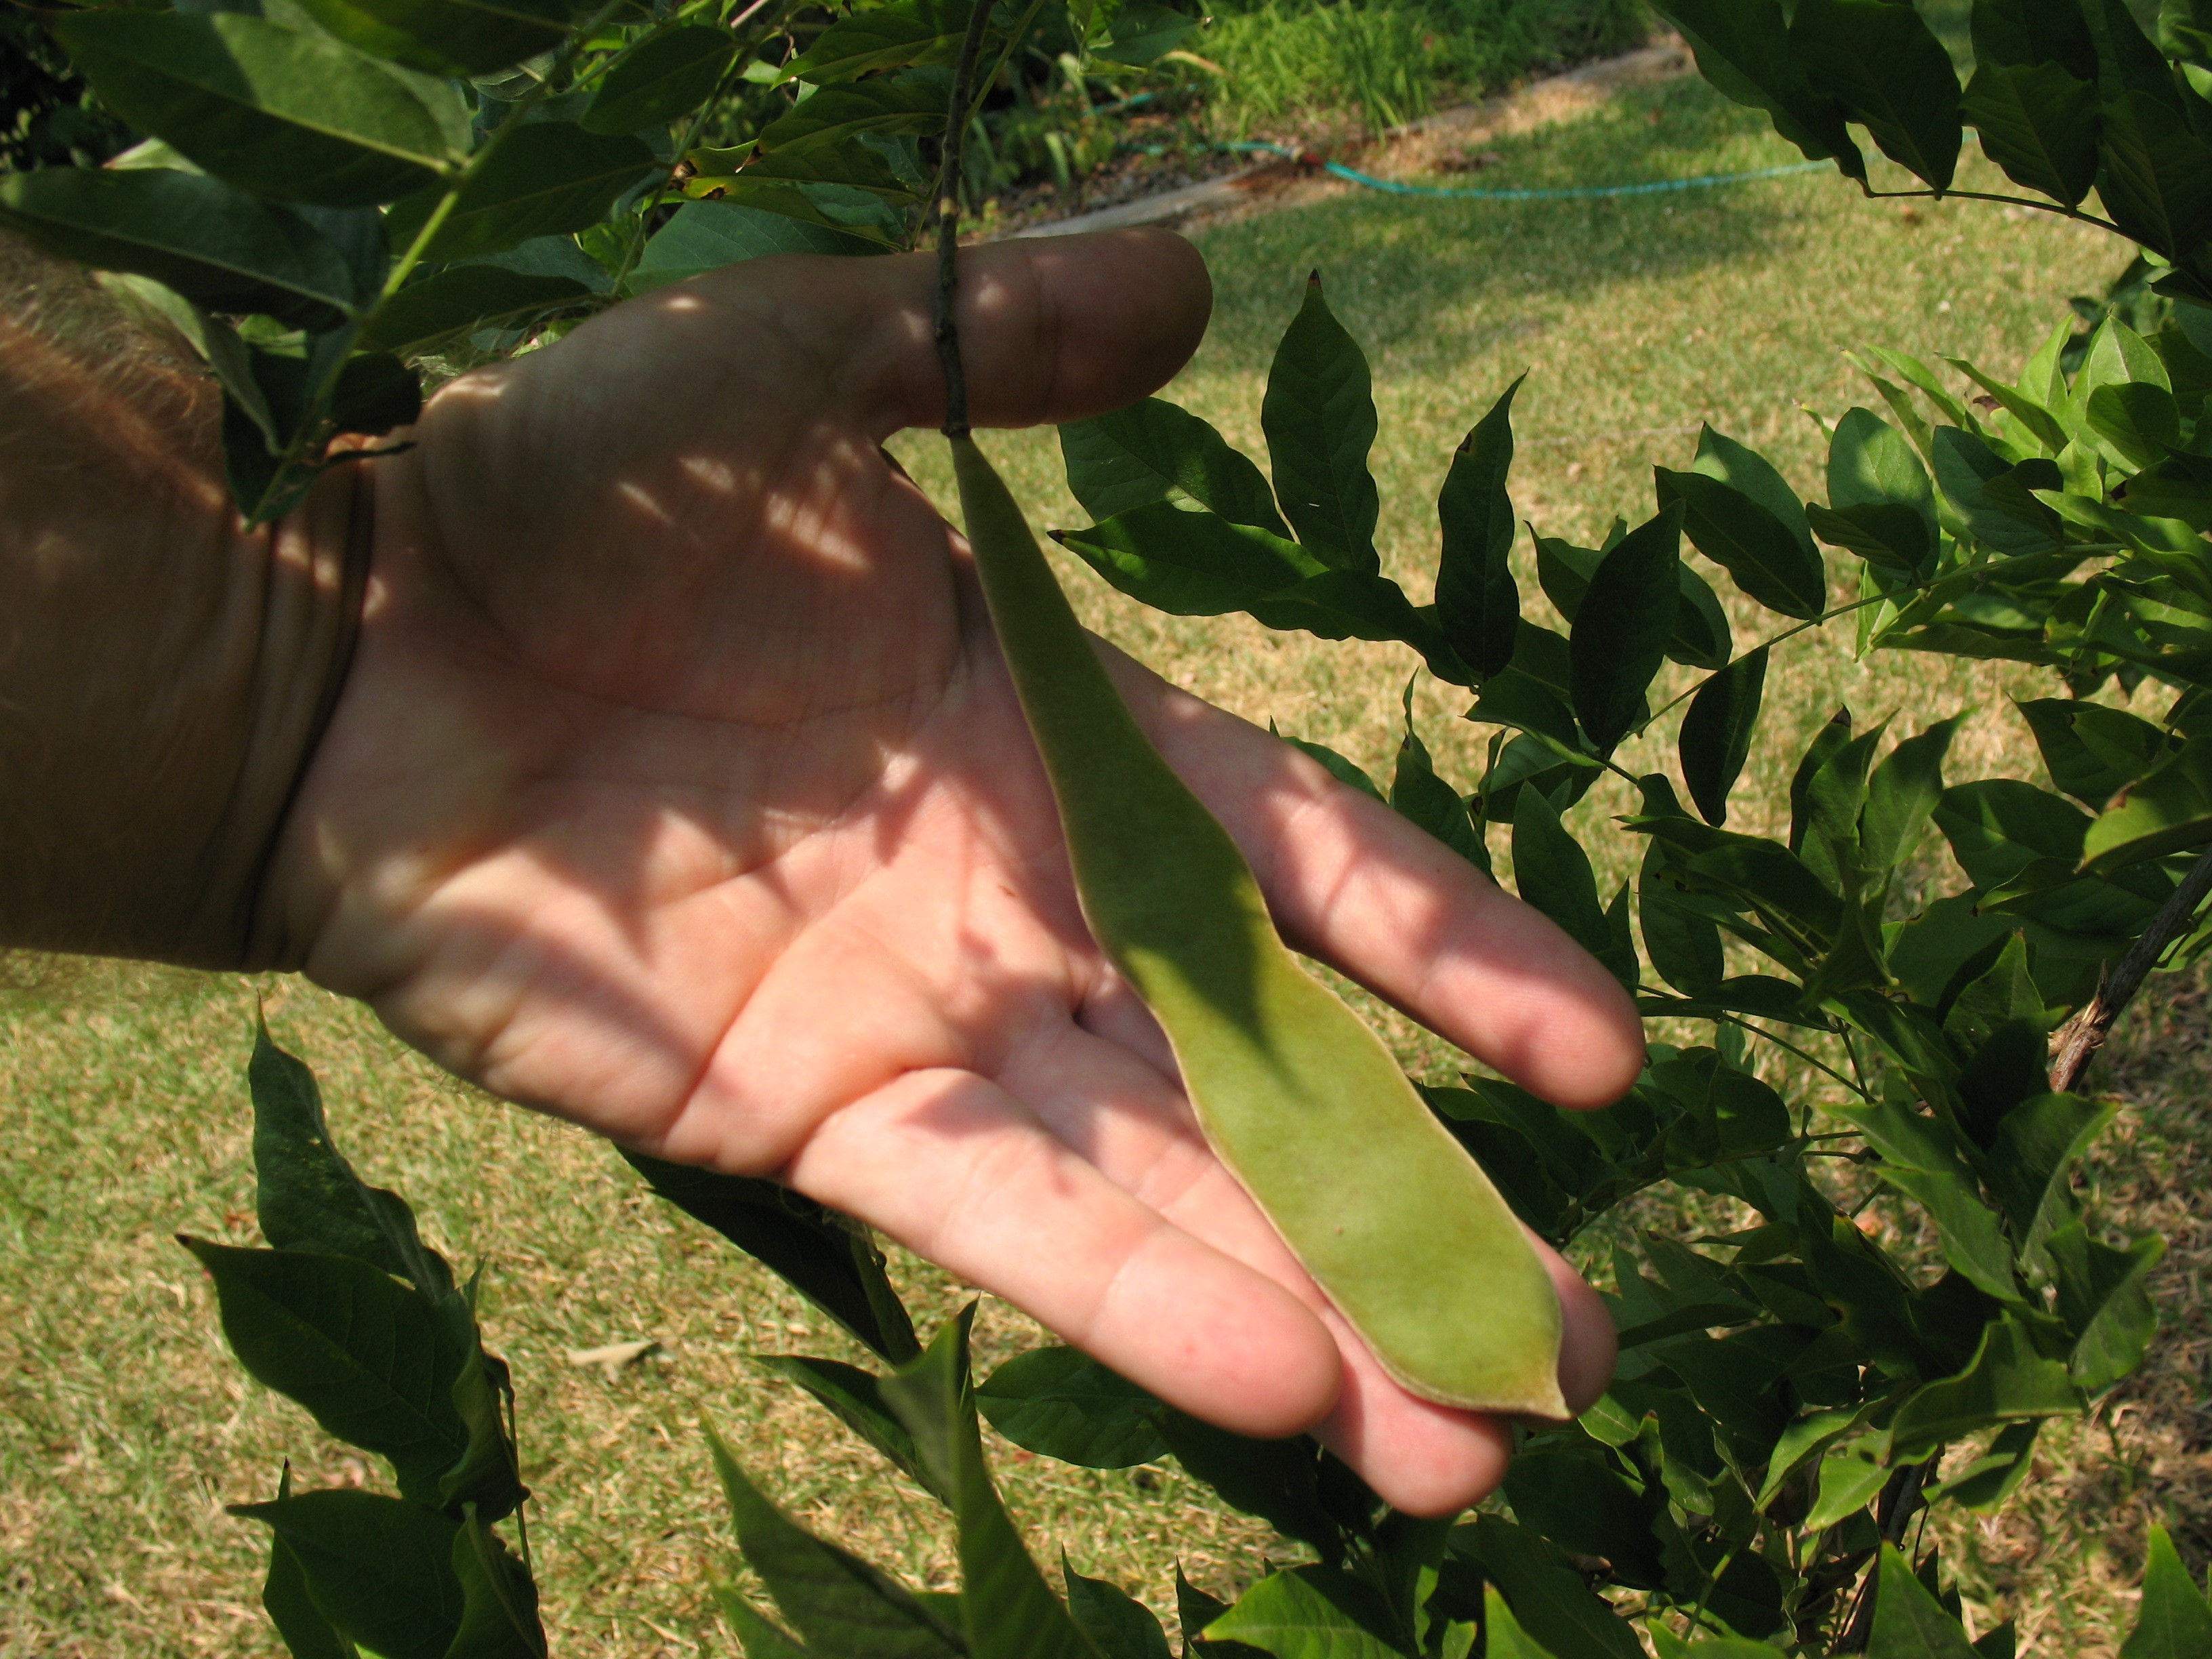 Hand holding green leaf-like wisteria fruit about the length of the hand.